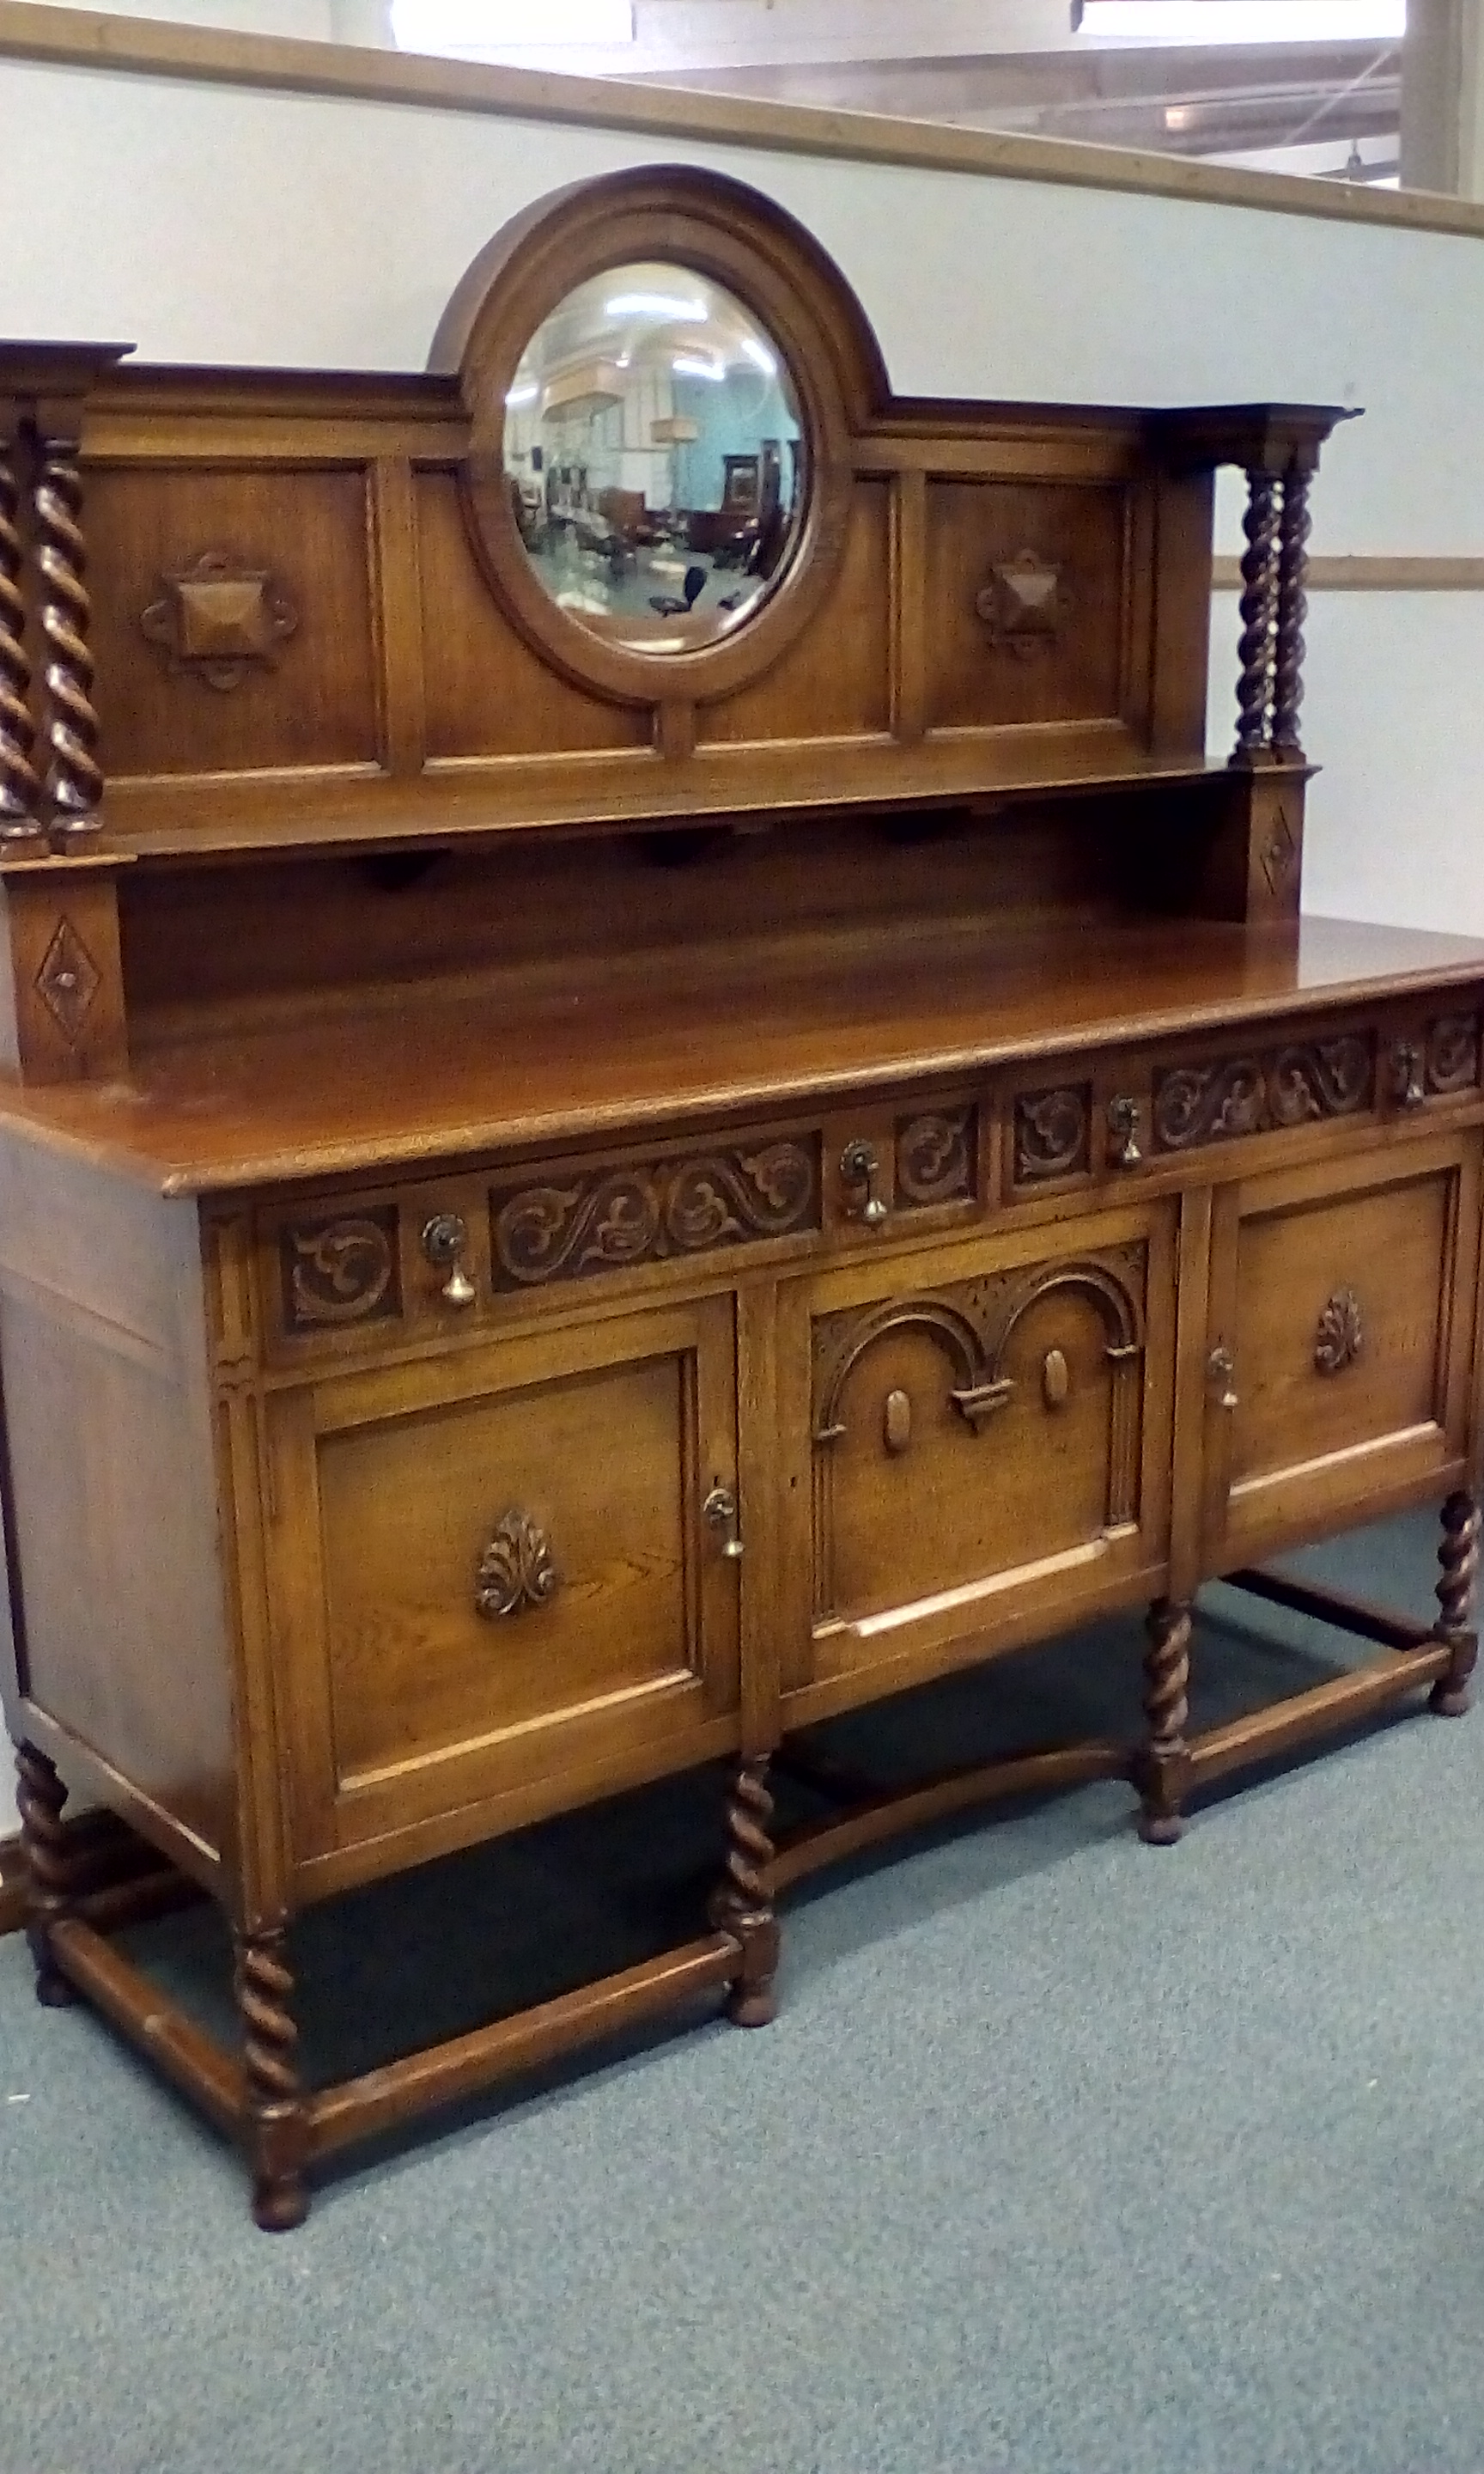 Oak Arts & Crafts style sideboard with carved deco - Image 2 of 2